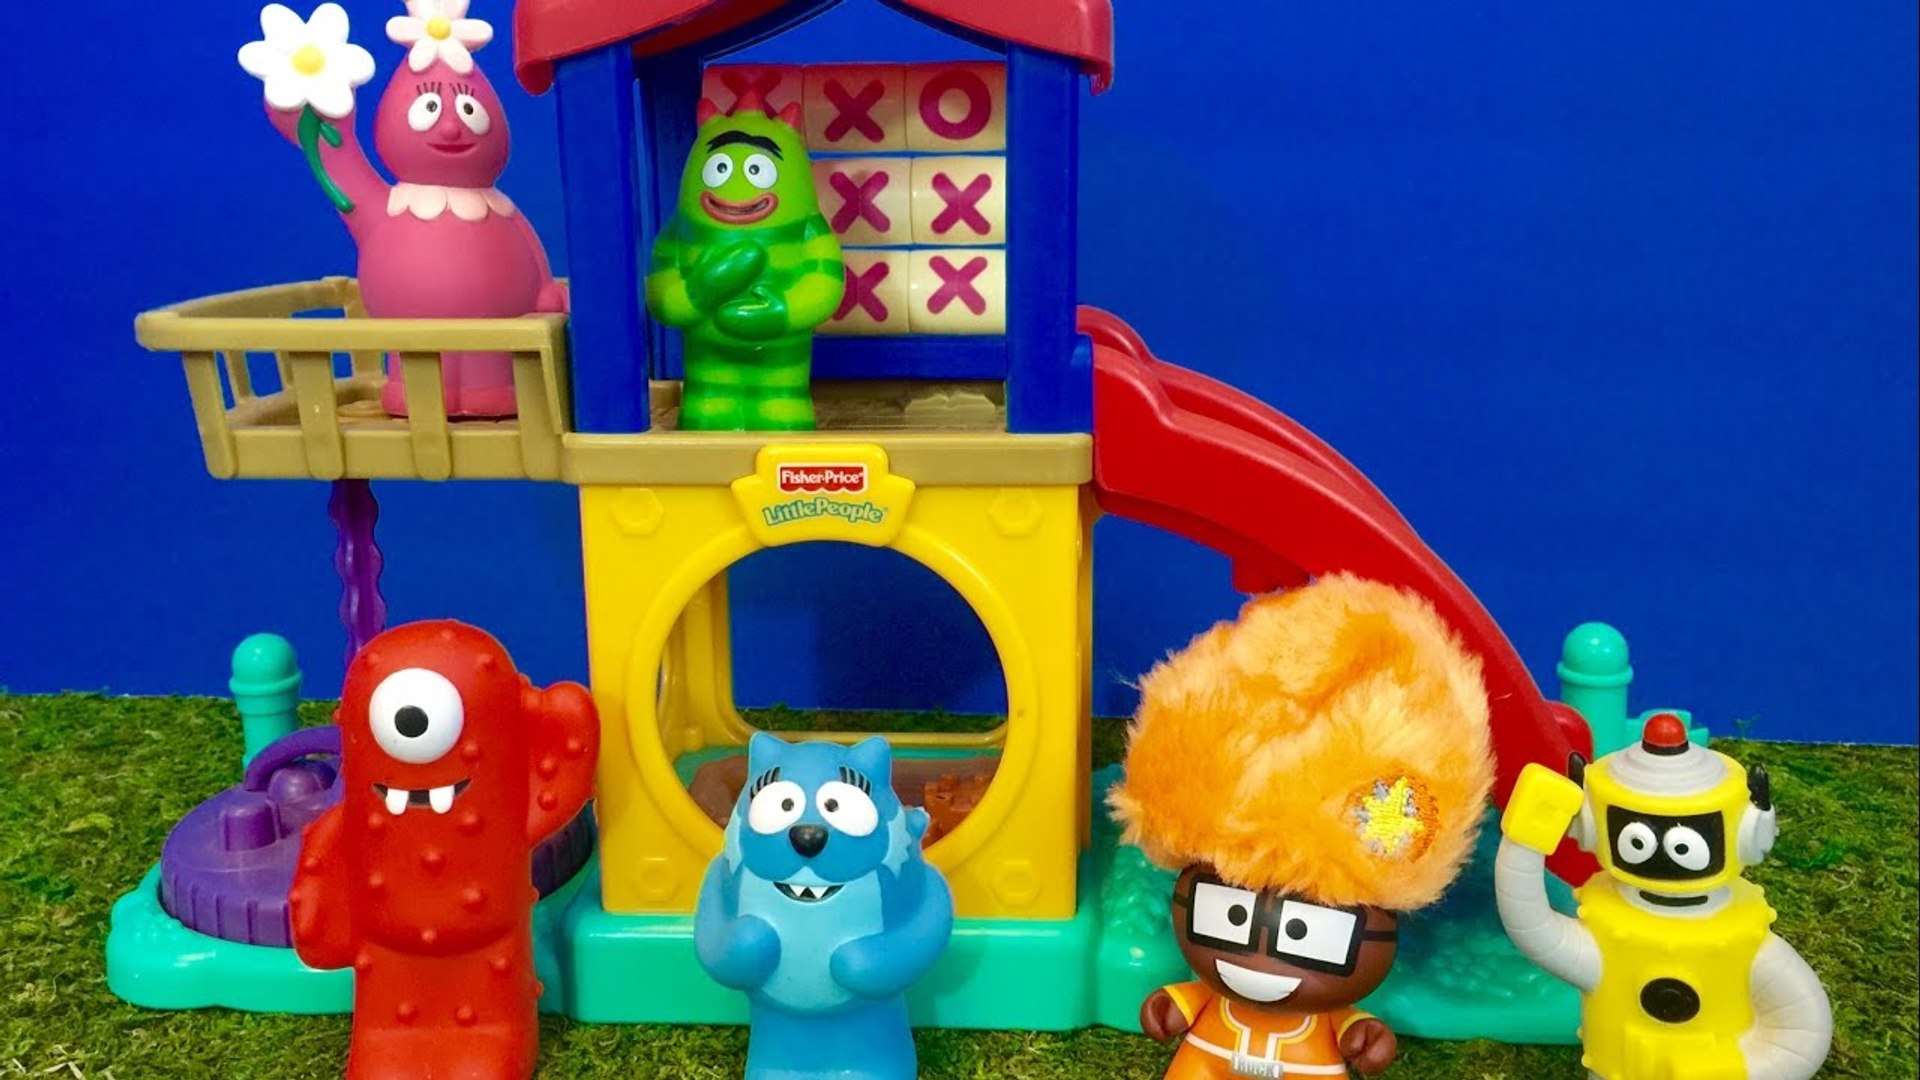 Yo Gabba Gabba Gang Toy Set Review and Unboxing - video Dailymotion